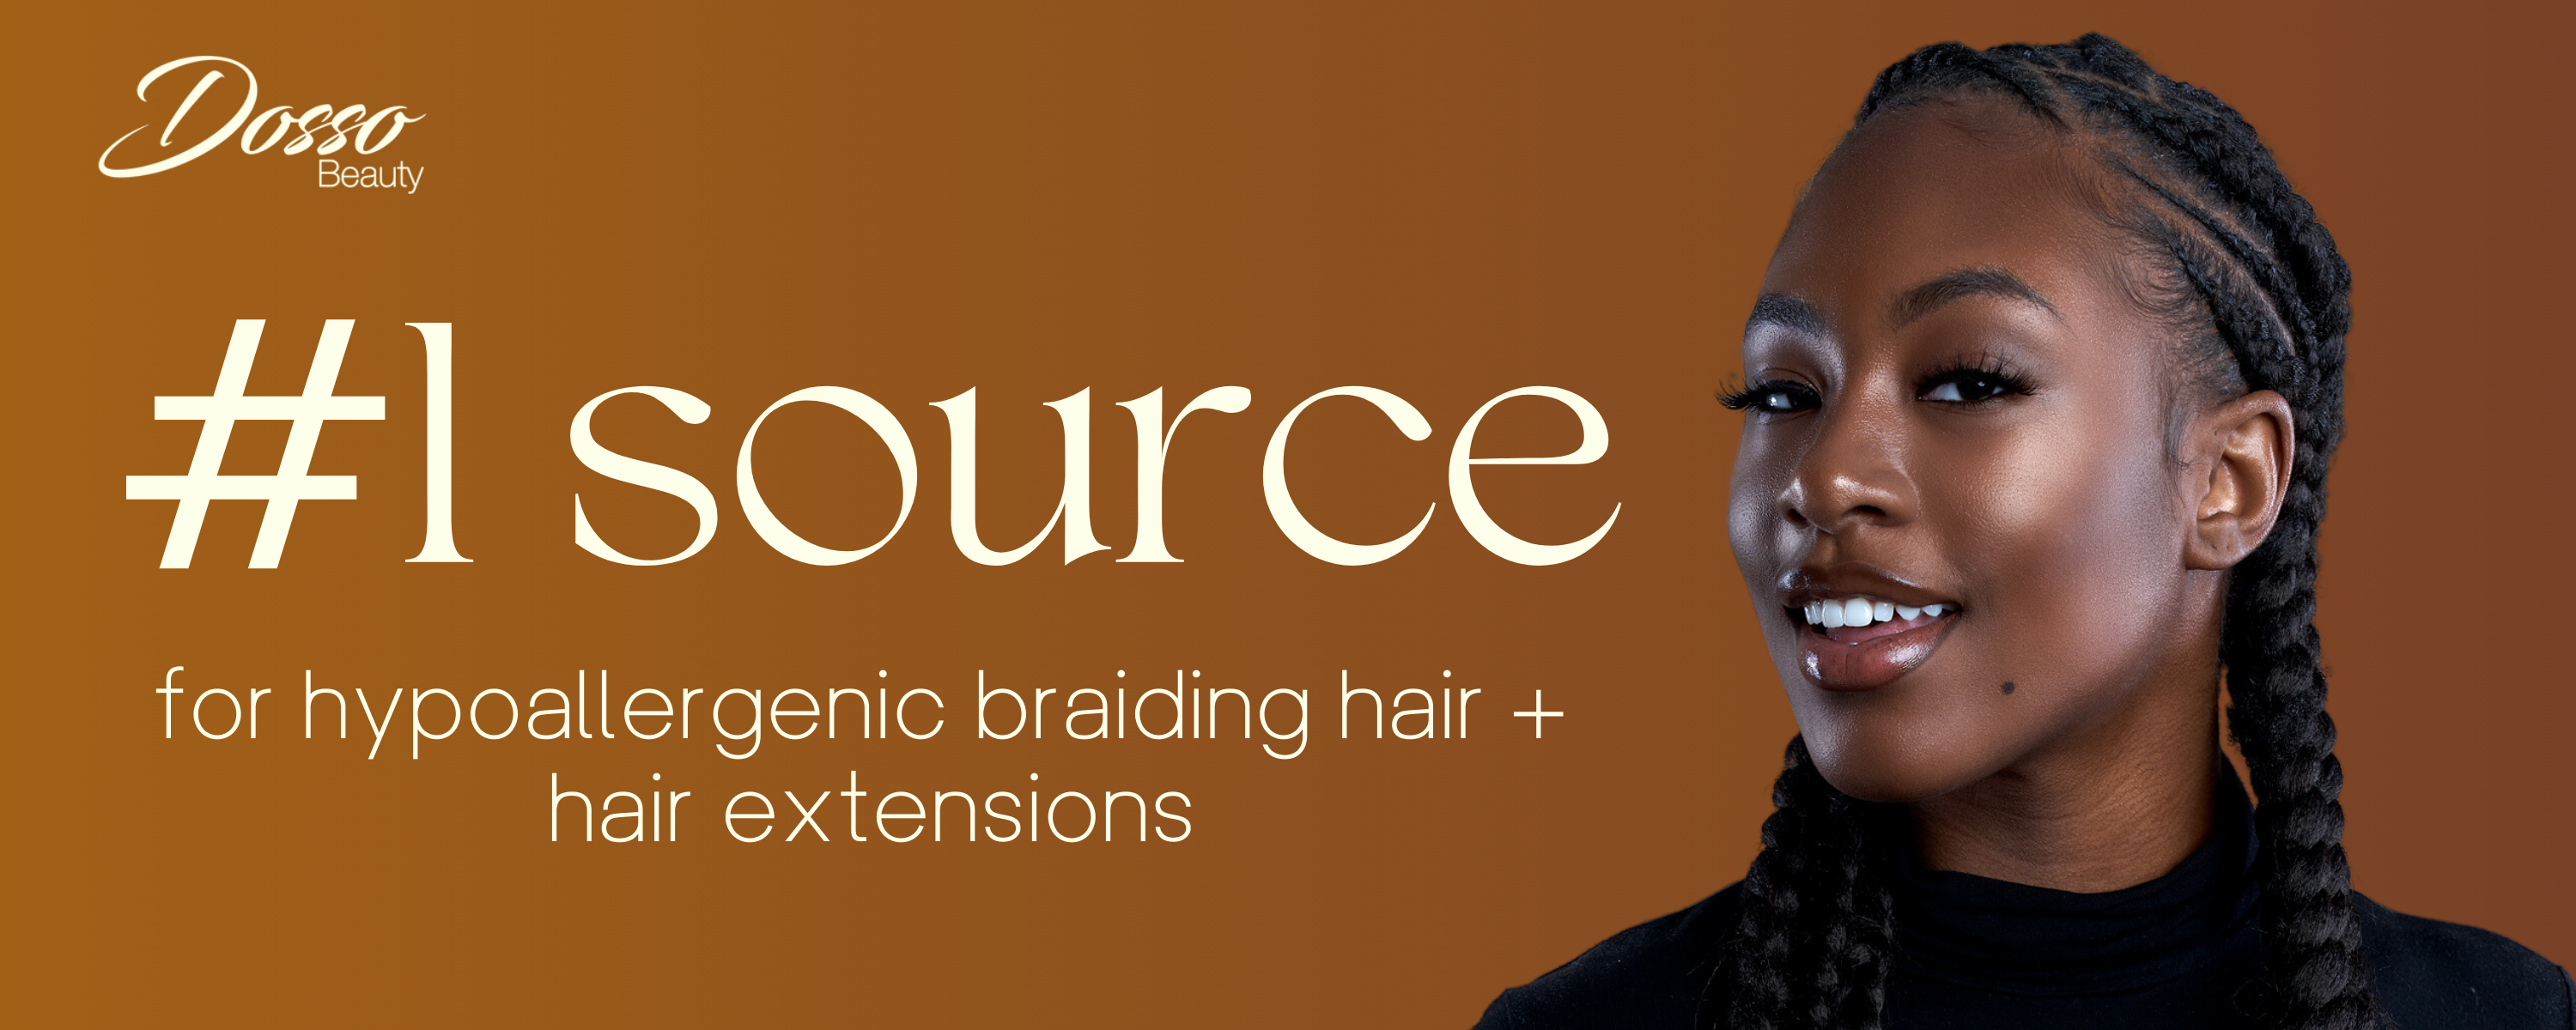 A woman with box braids smiles at the camera next to text that says "#1 source for hypoallergenic braiding hair + hair extensions."